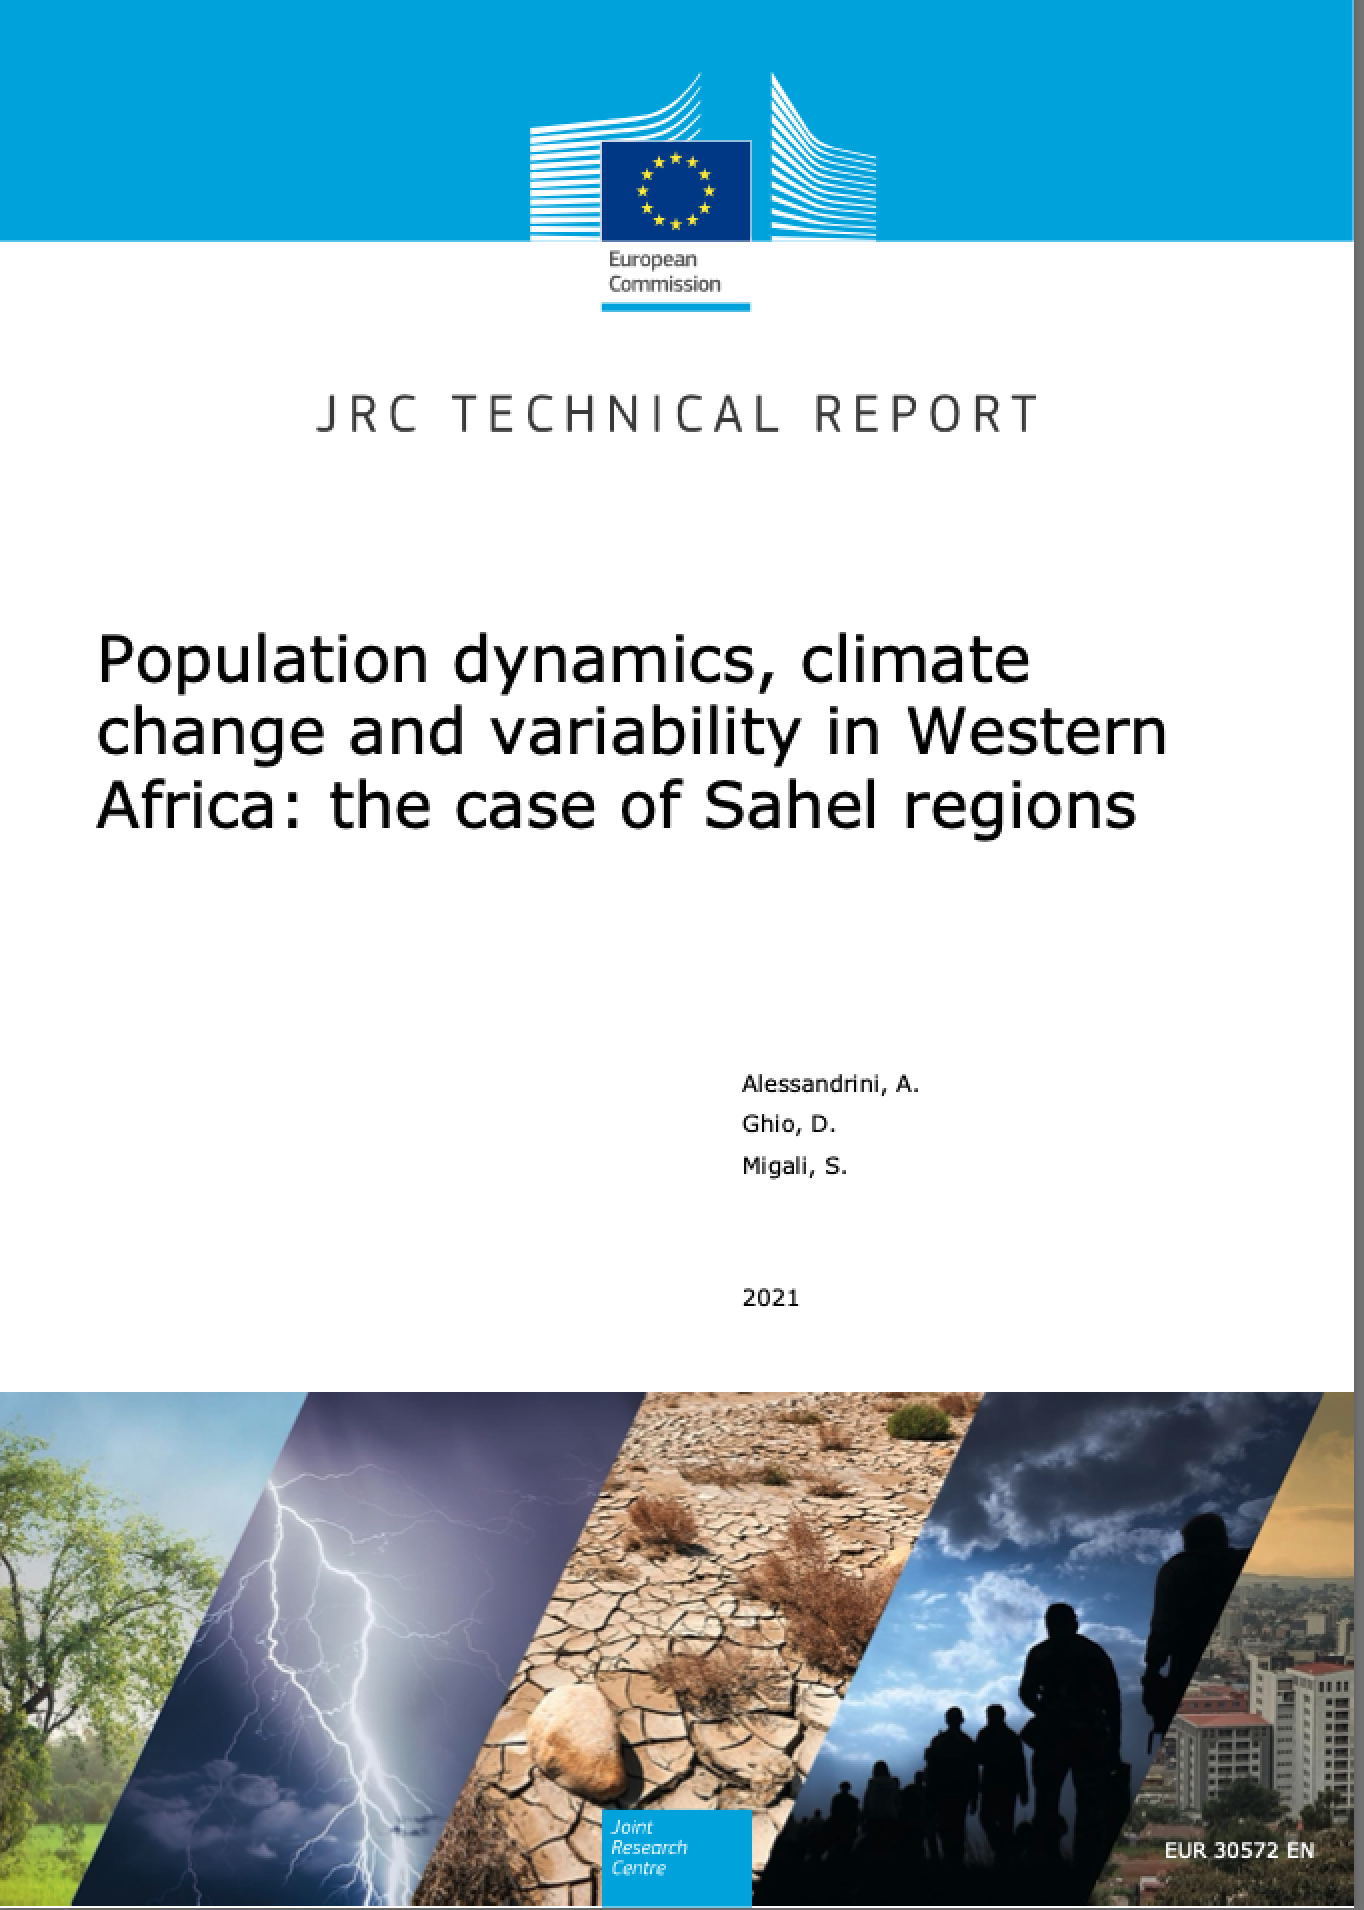 Population dynamics, climate change and variability in Western Africa: the case of Sahel regions